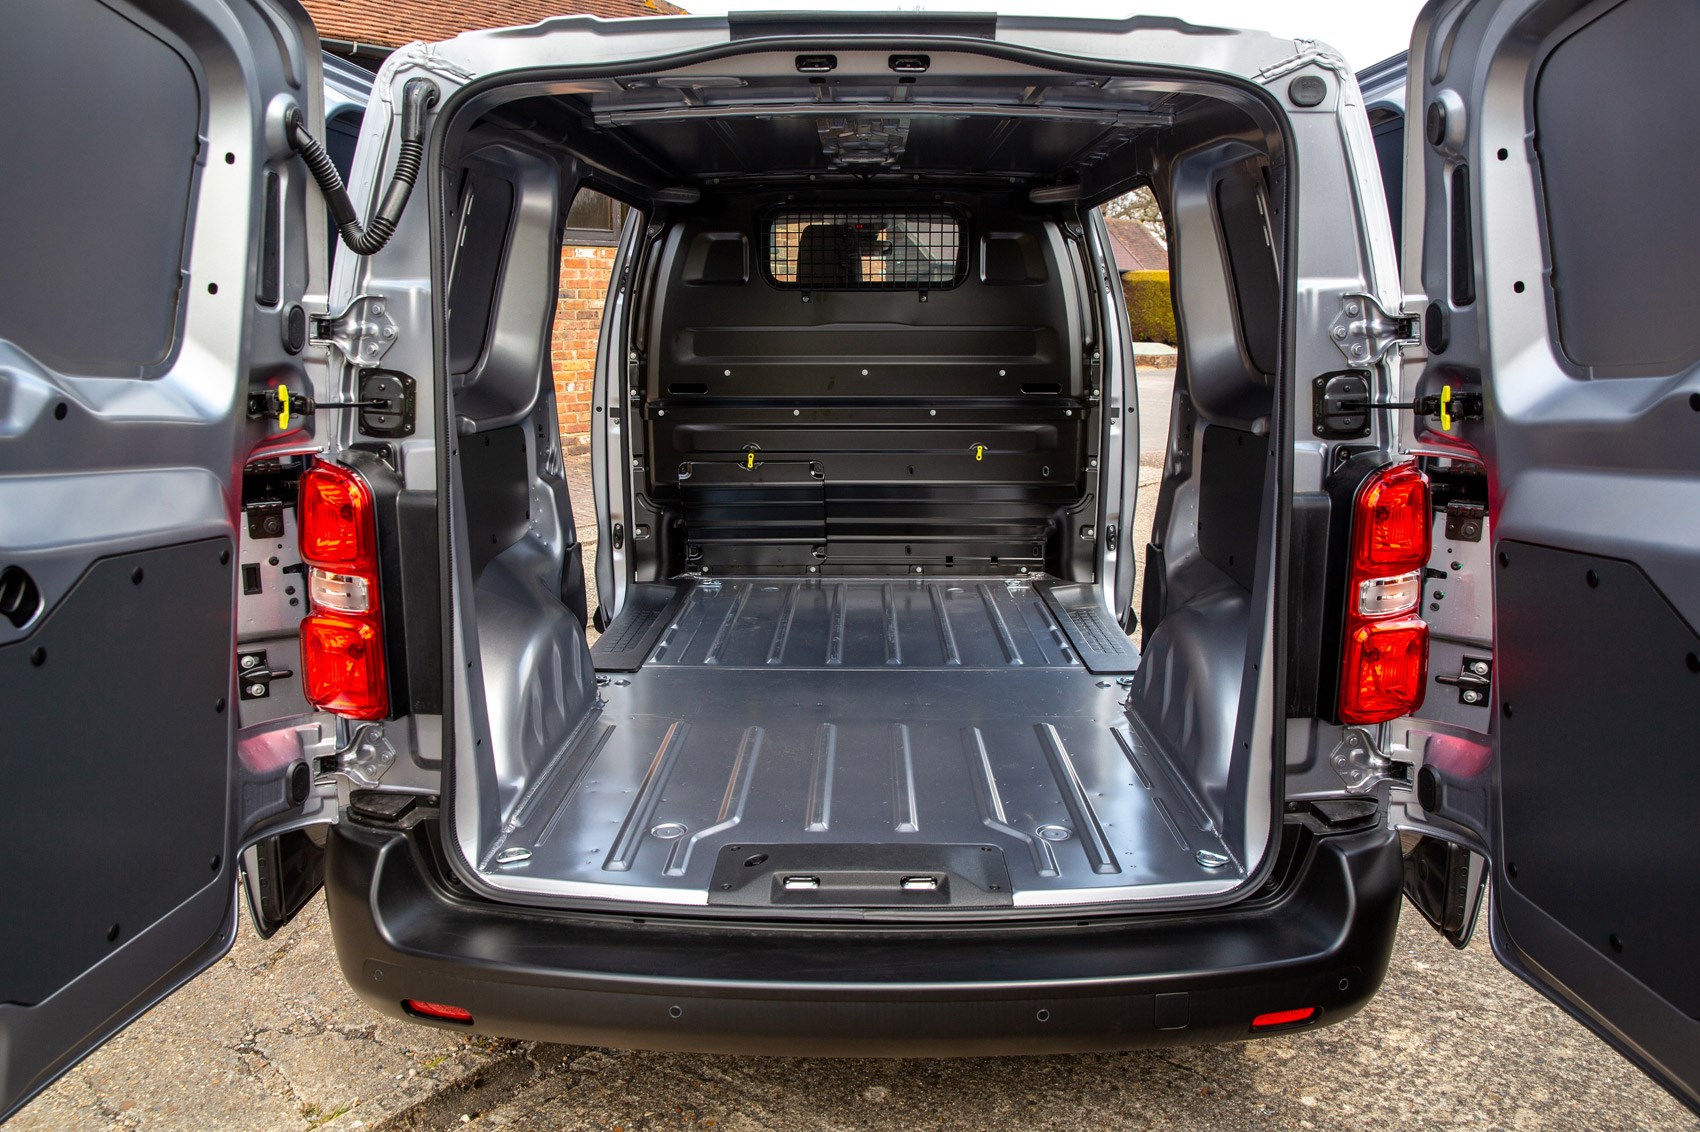 Toyota Proace Electric van - payload, load area, cargo space, empty, silver